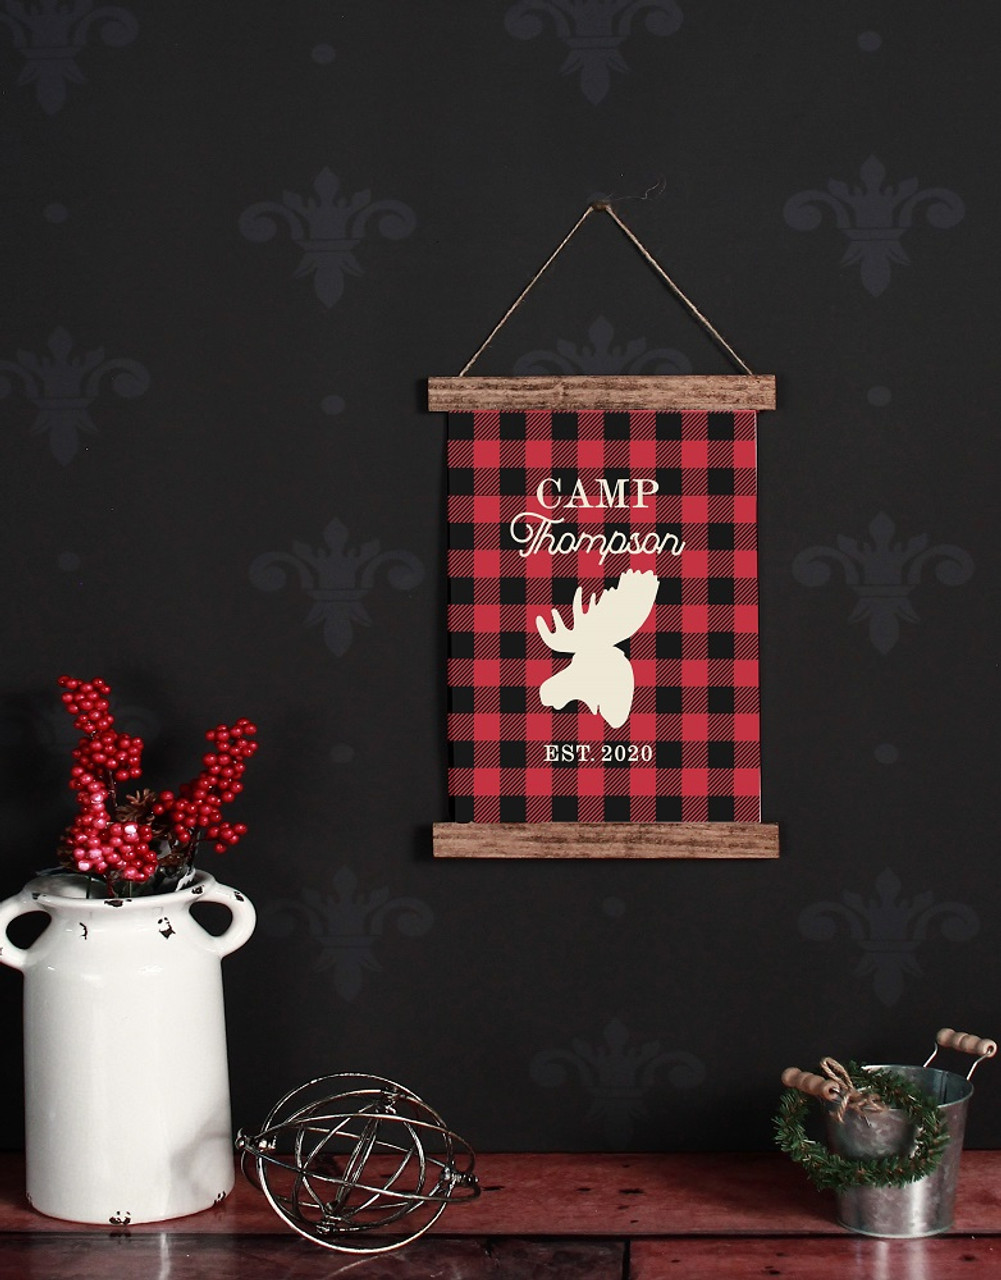 https://cdn11.bigcommerce.com/s-571px4/images/stencil/1280x1280/products/3542/17370/CWH0258_Canvas_Wall_Hanging_Holiday_Cabin_Camp_Lake_House_Decor_Moose_Buffalo_Plaid_Custom_Last_Name_Est_Date_12x14__46940.1608003253.jpg?c=2